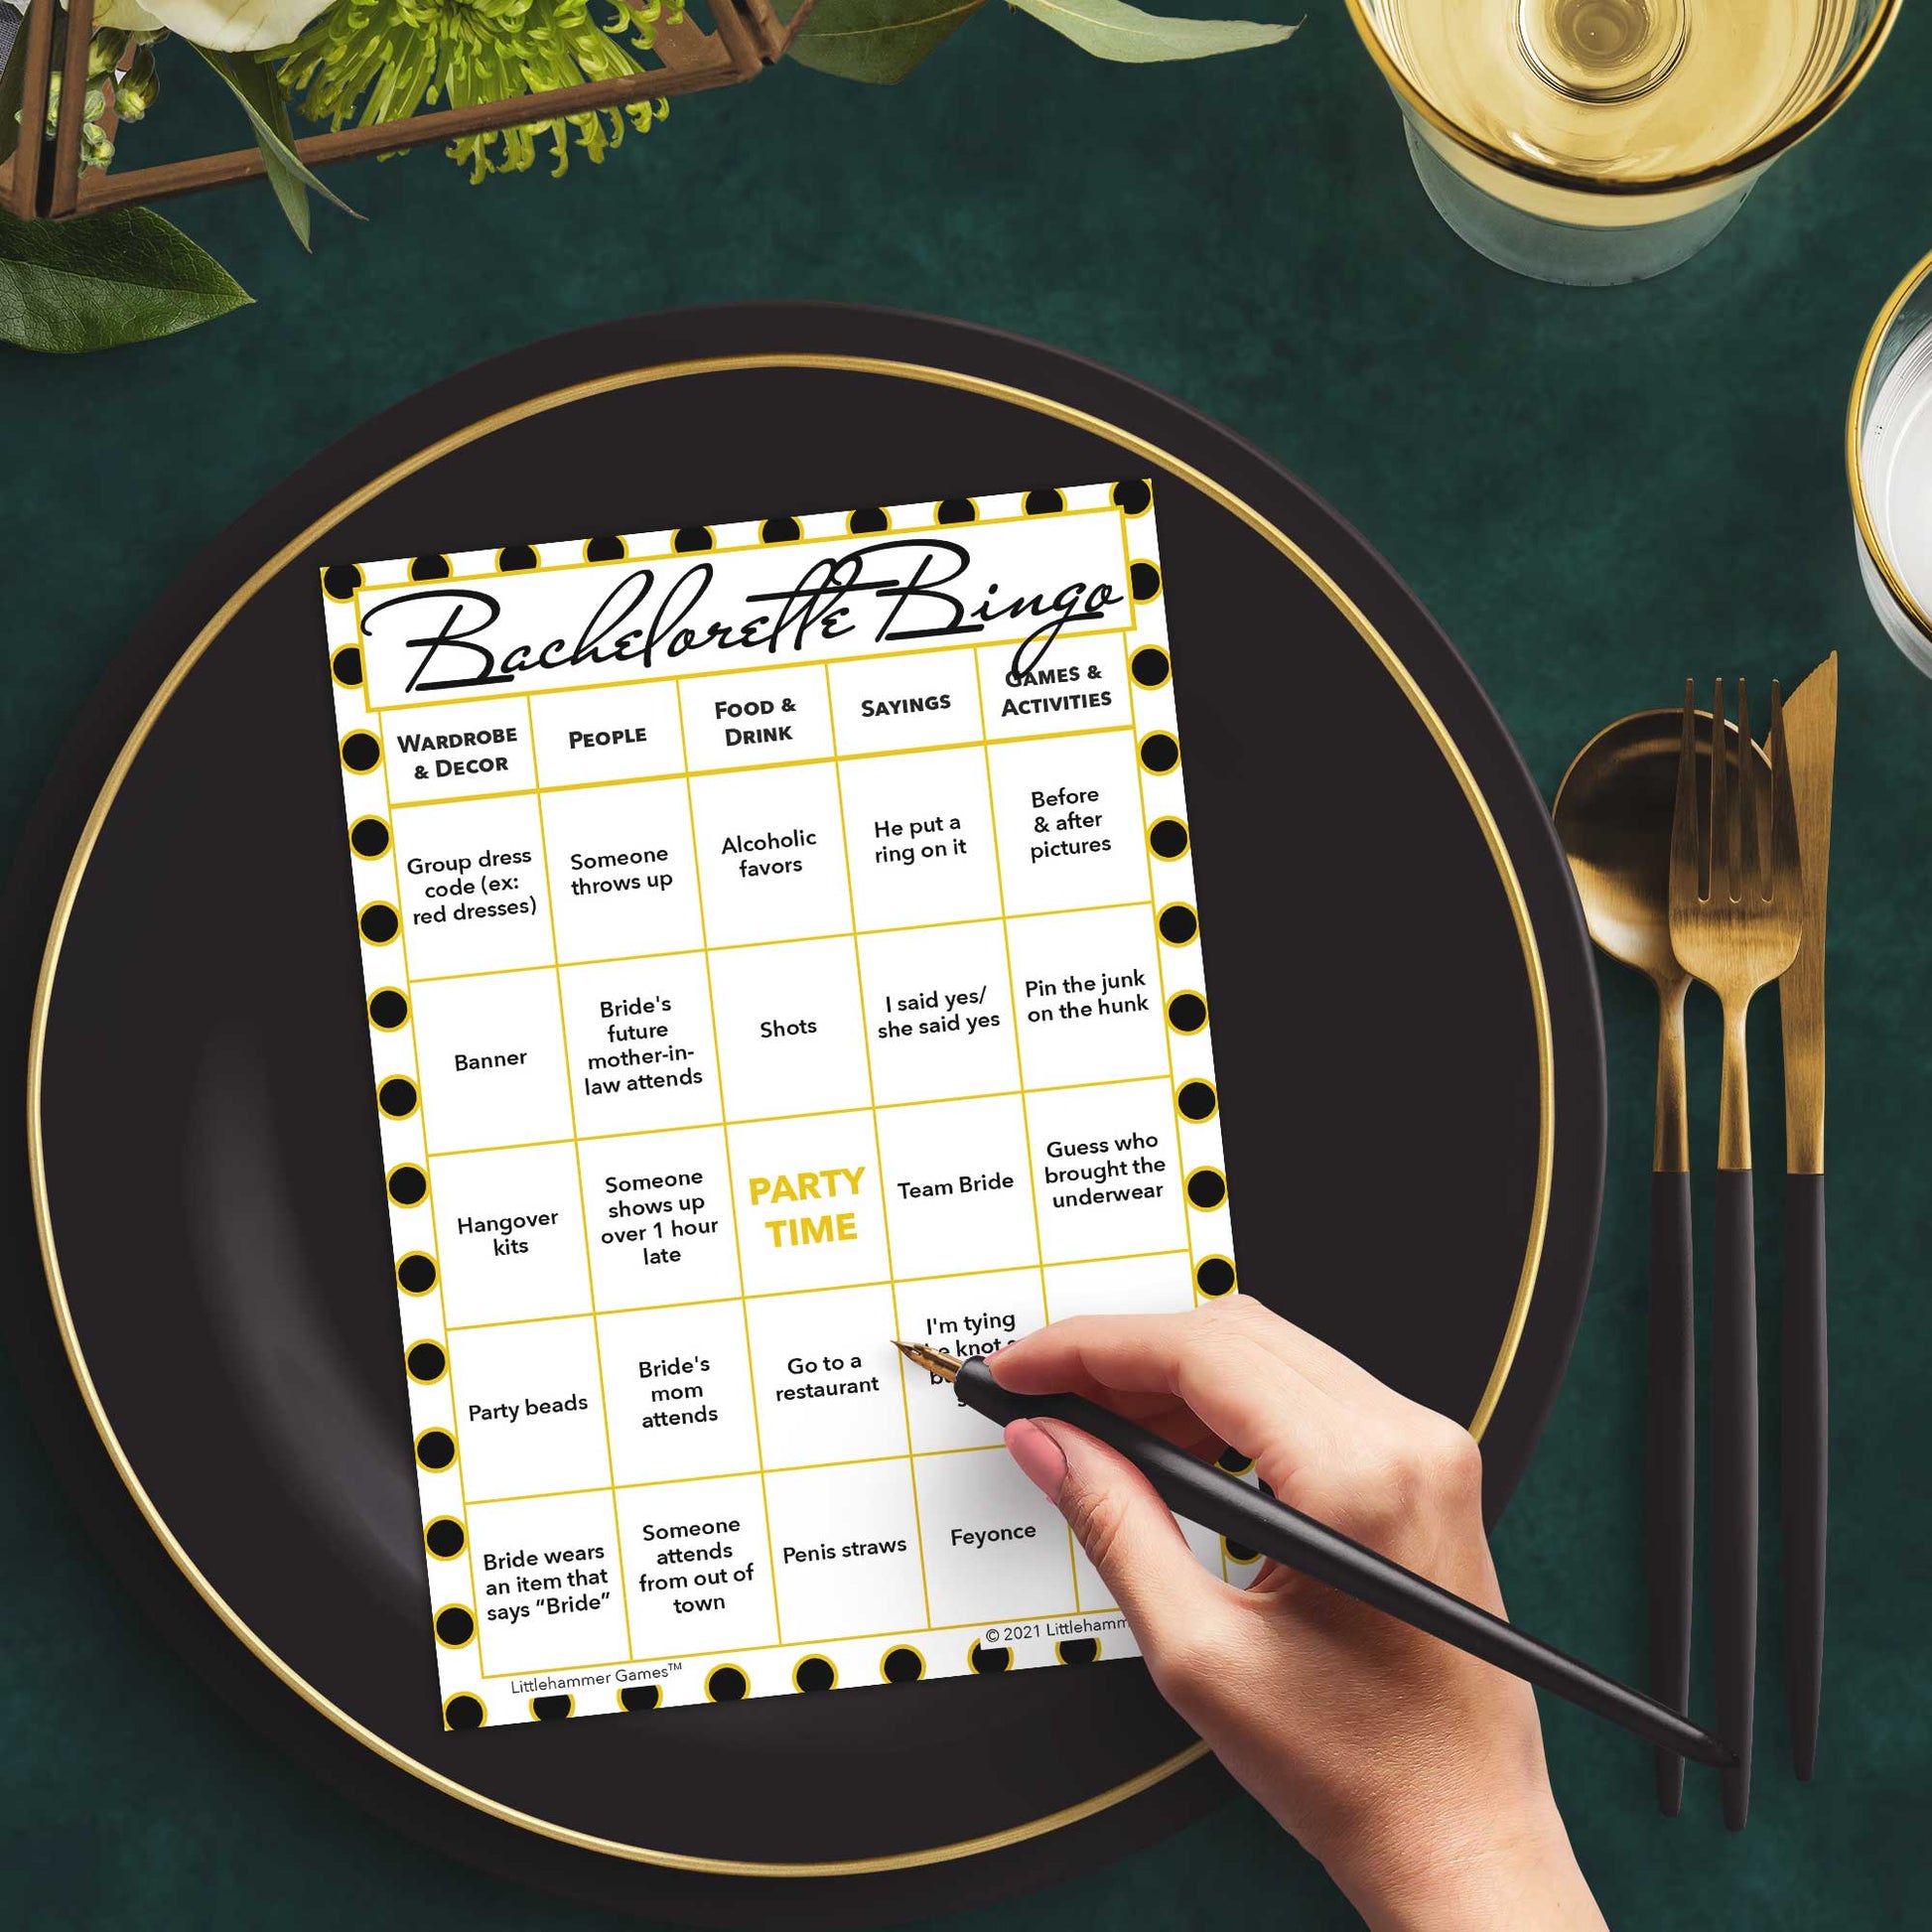 Woman with a pen sitting at a table with a black and gold polka dot Bachelorette Bingo game card on a gold and black plate on a dark place setting